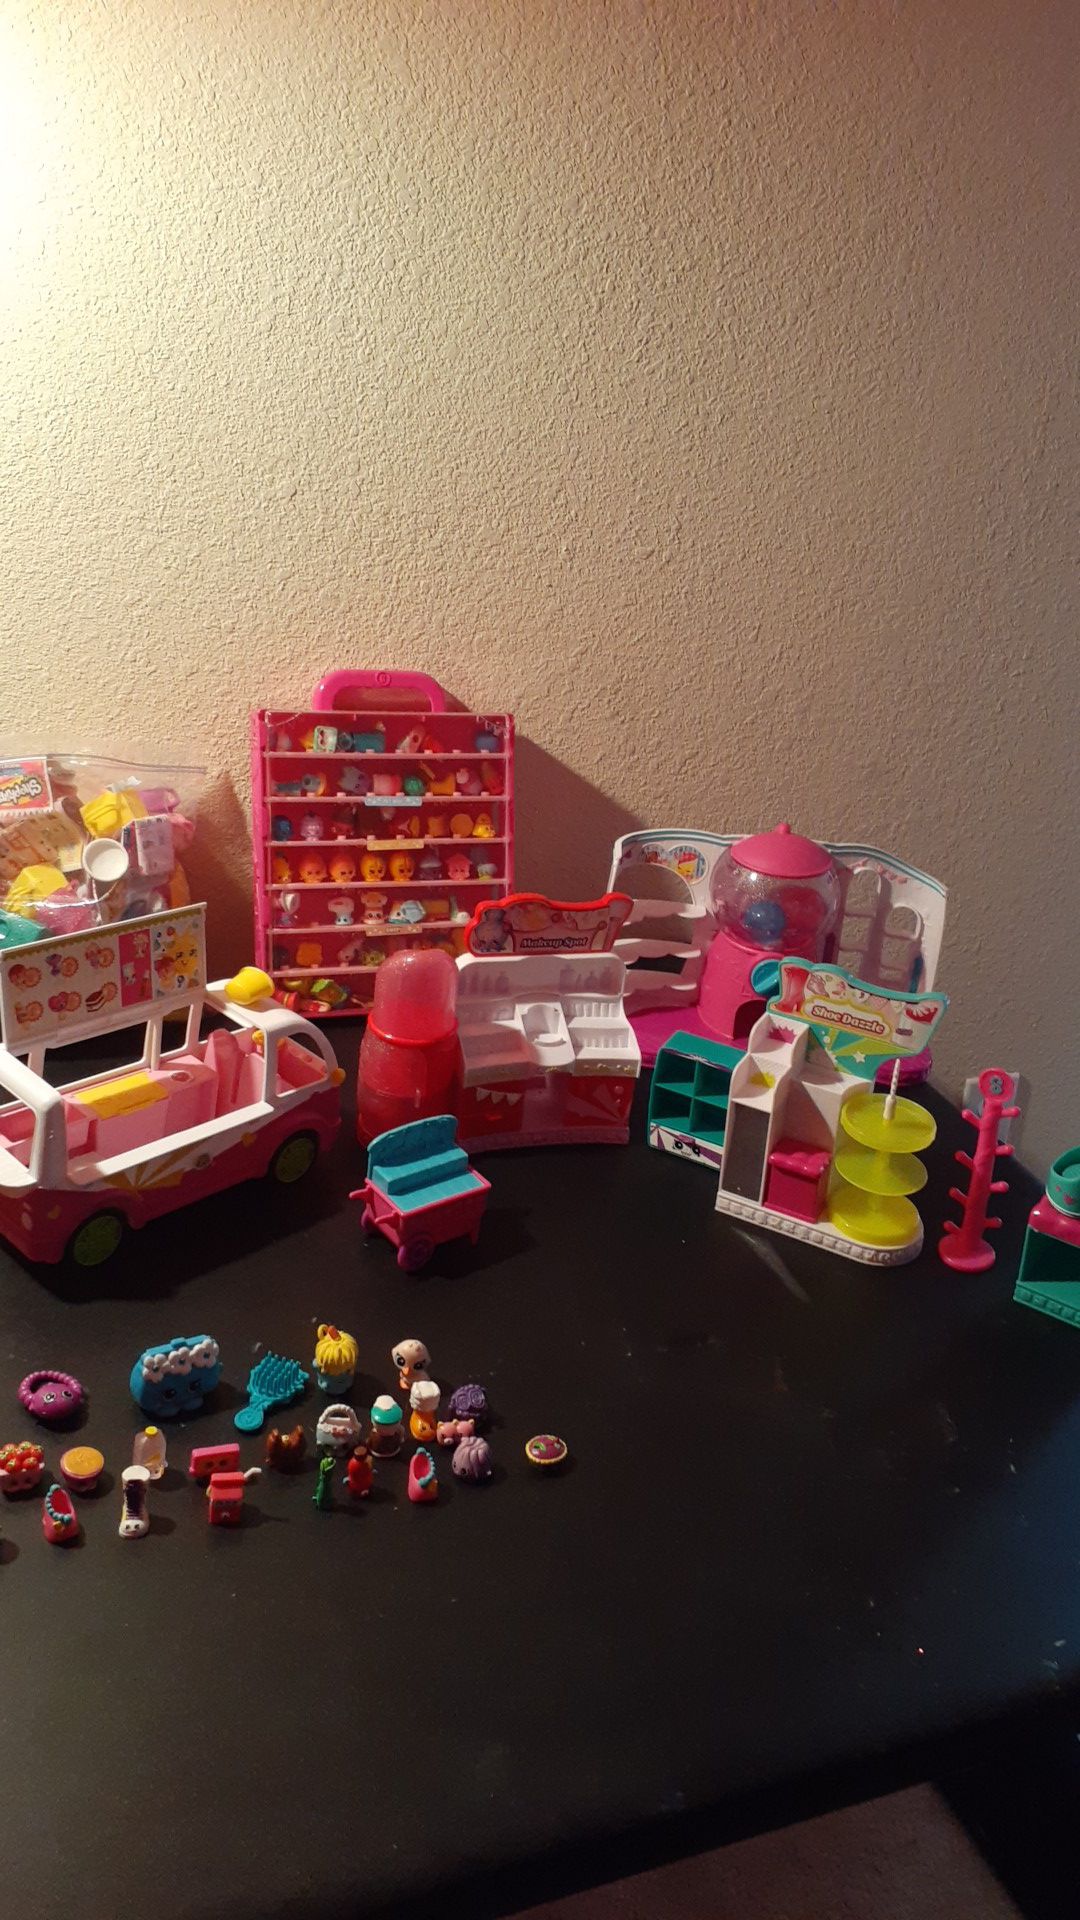 Shopkins figurines and accessories, jewelry